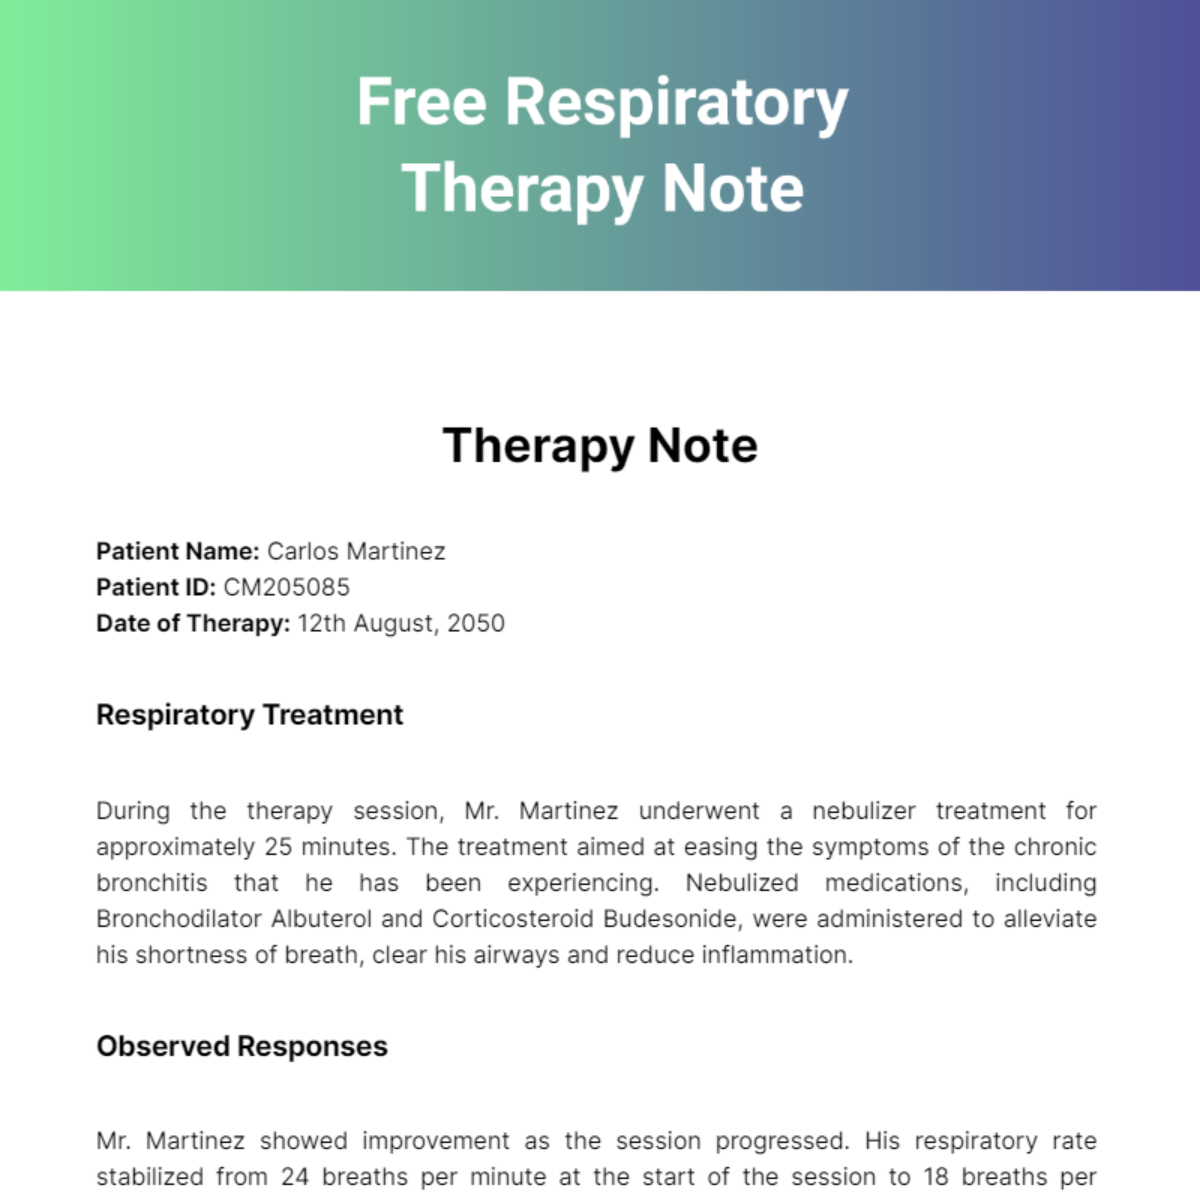 Free Respiratory Therapy Note Template